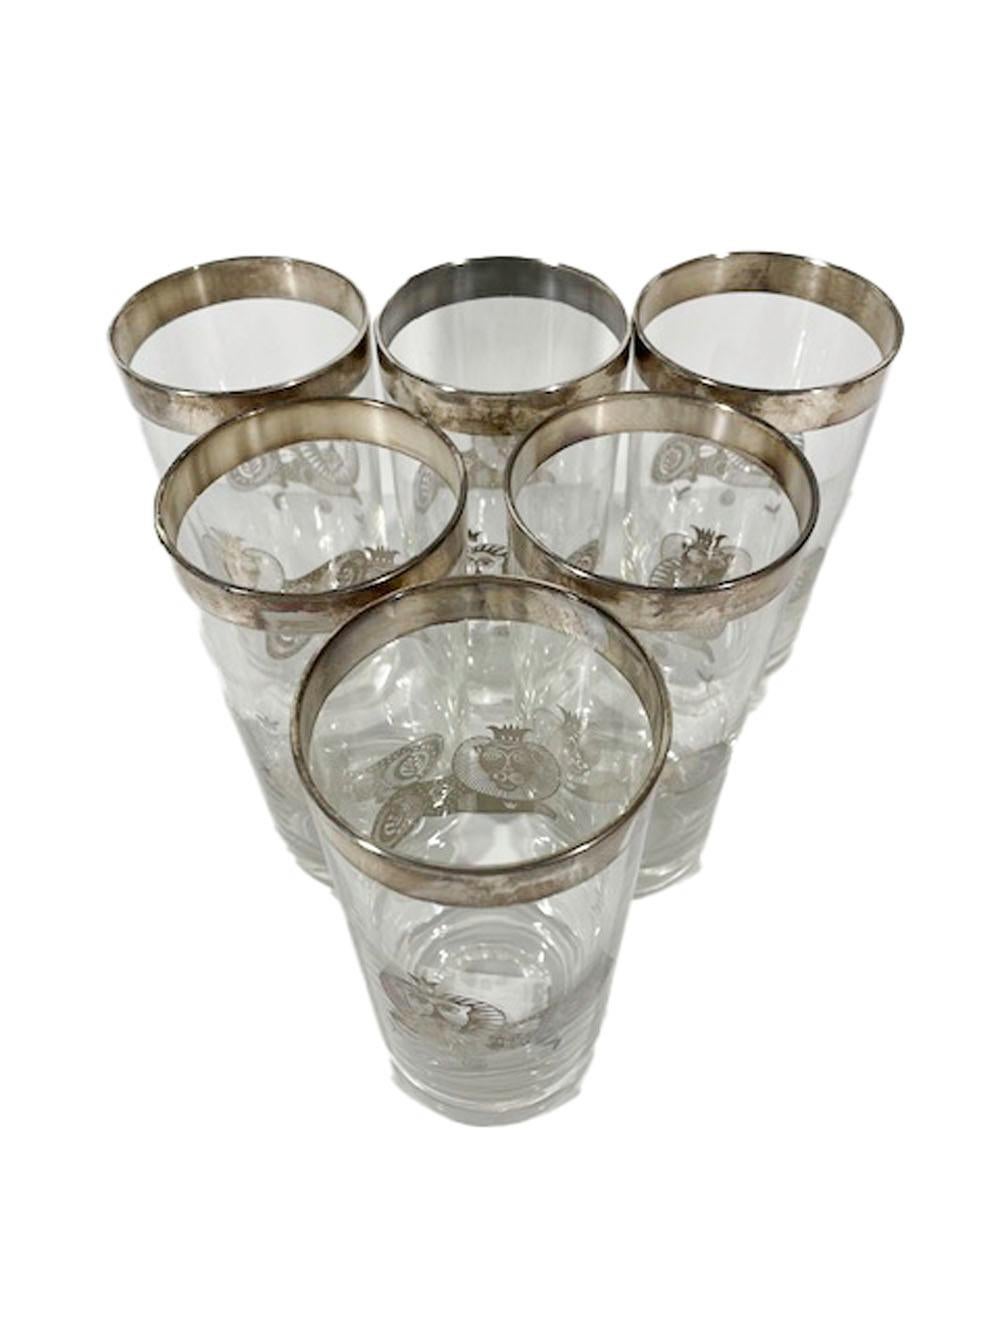 Signed set of 6 Georges Briard highball glasses with a silver rim above stylized images of recumbent lions wearing crowns.